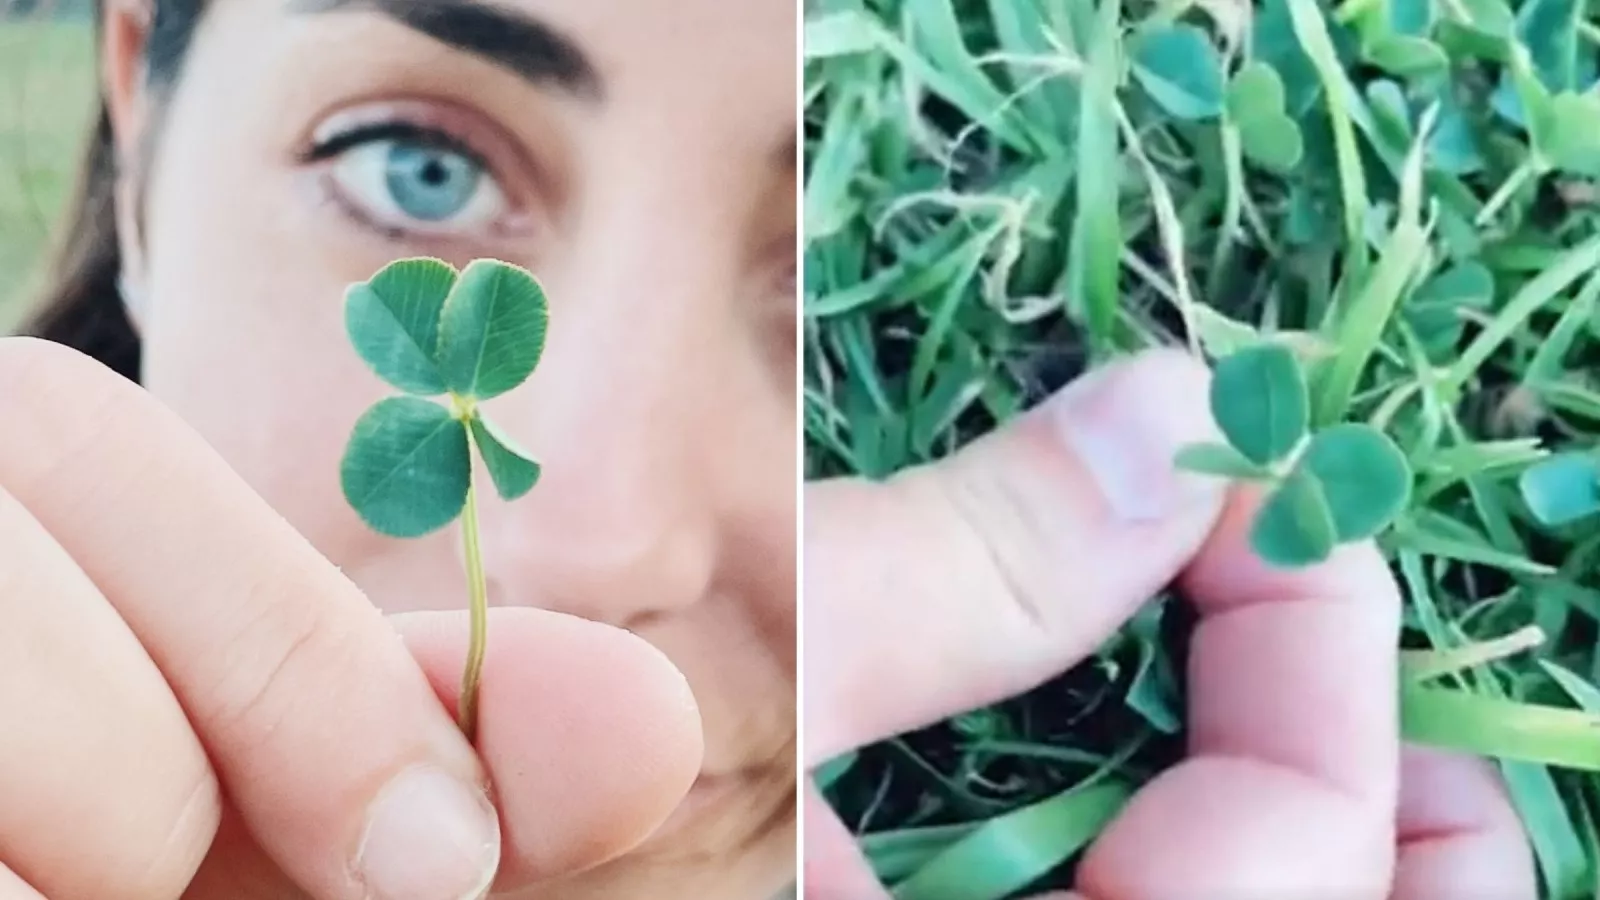 Woman in Disbelief After Finding Incredibly Rare Four-Leaf Clover: 'Luck